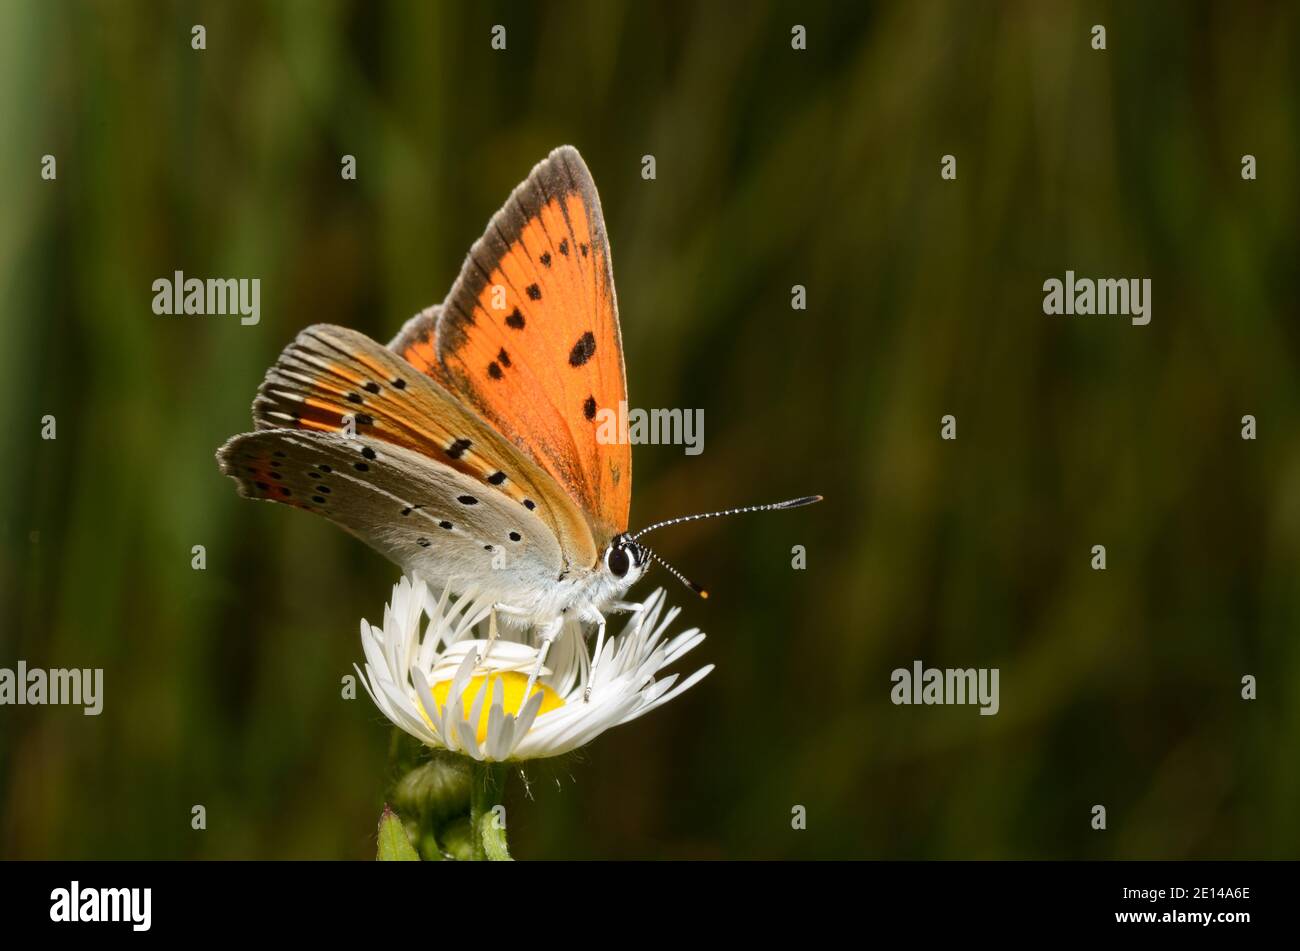 orange brown butterfly sitting on a fresh daisy flower with green background Stock Photo